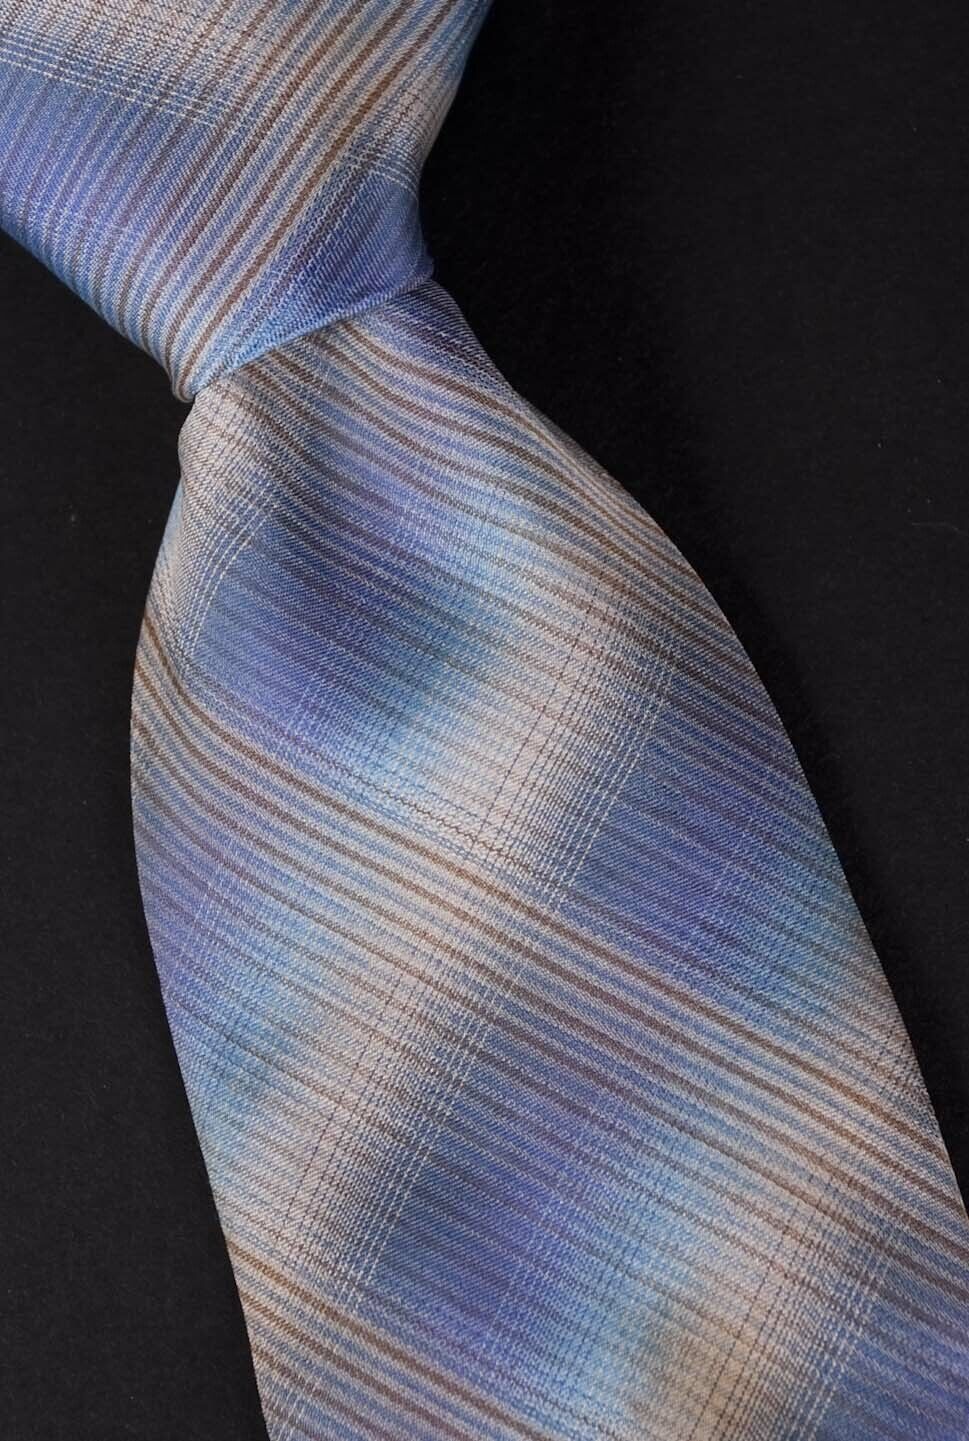 Missoni Tie Blue 100% Silk Made in Italy *ug041019